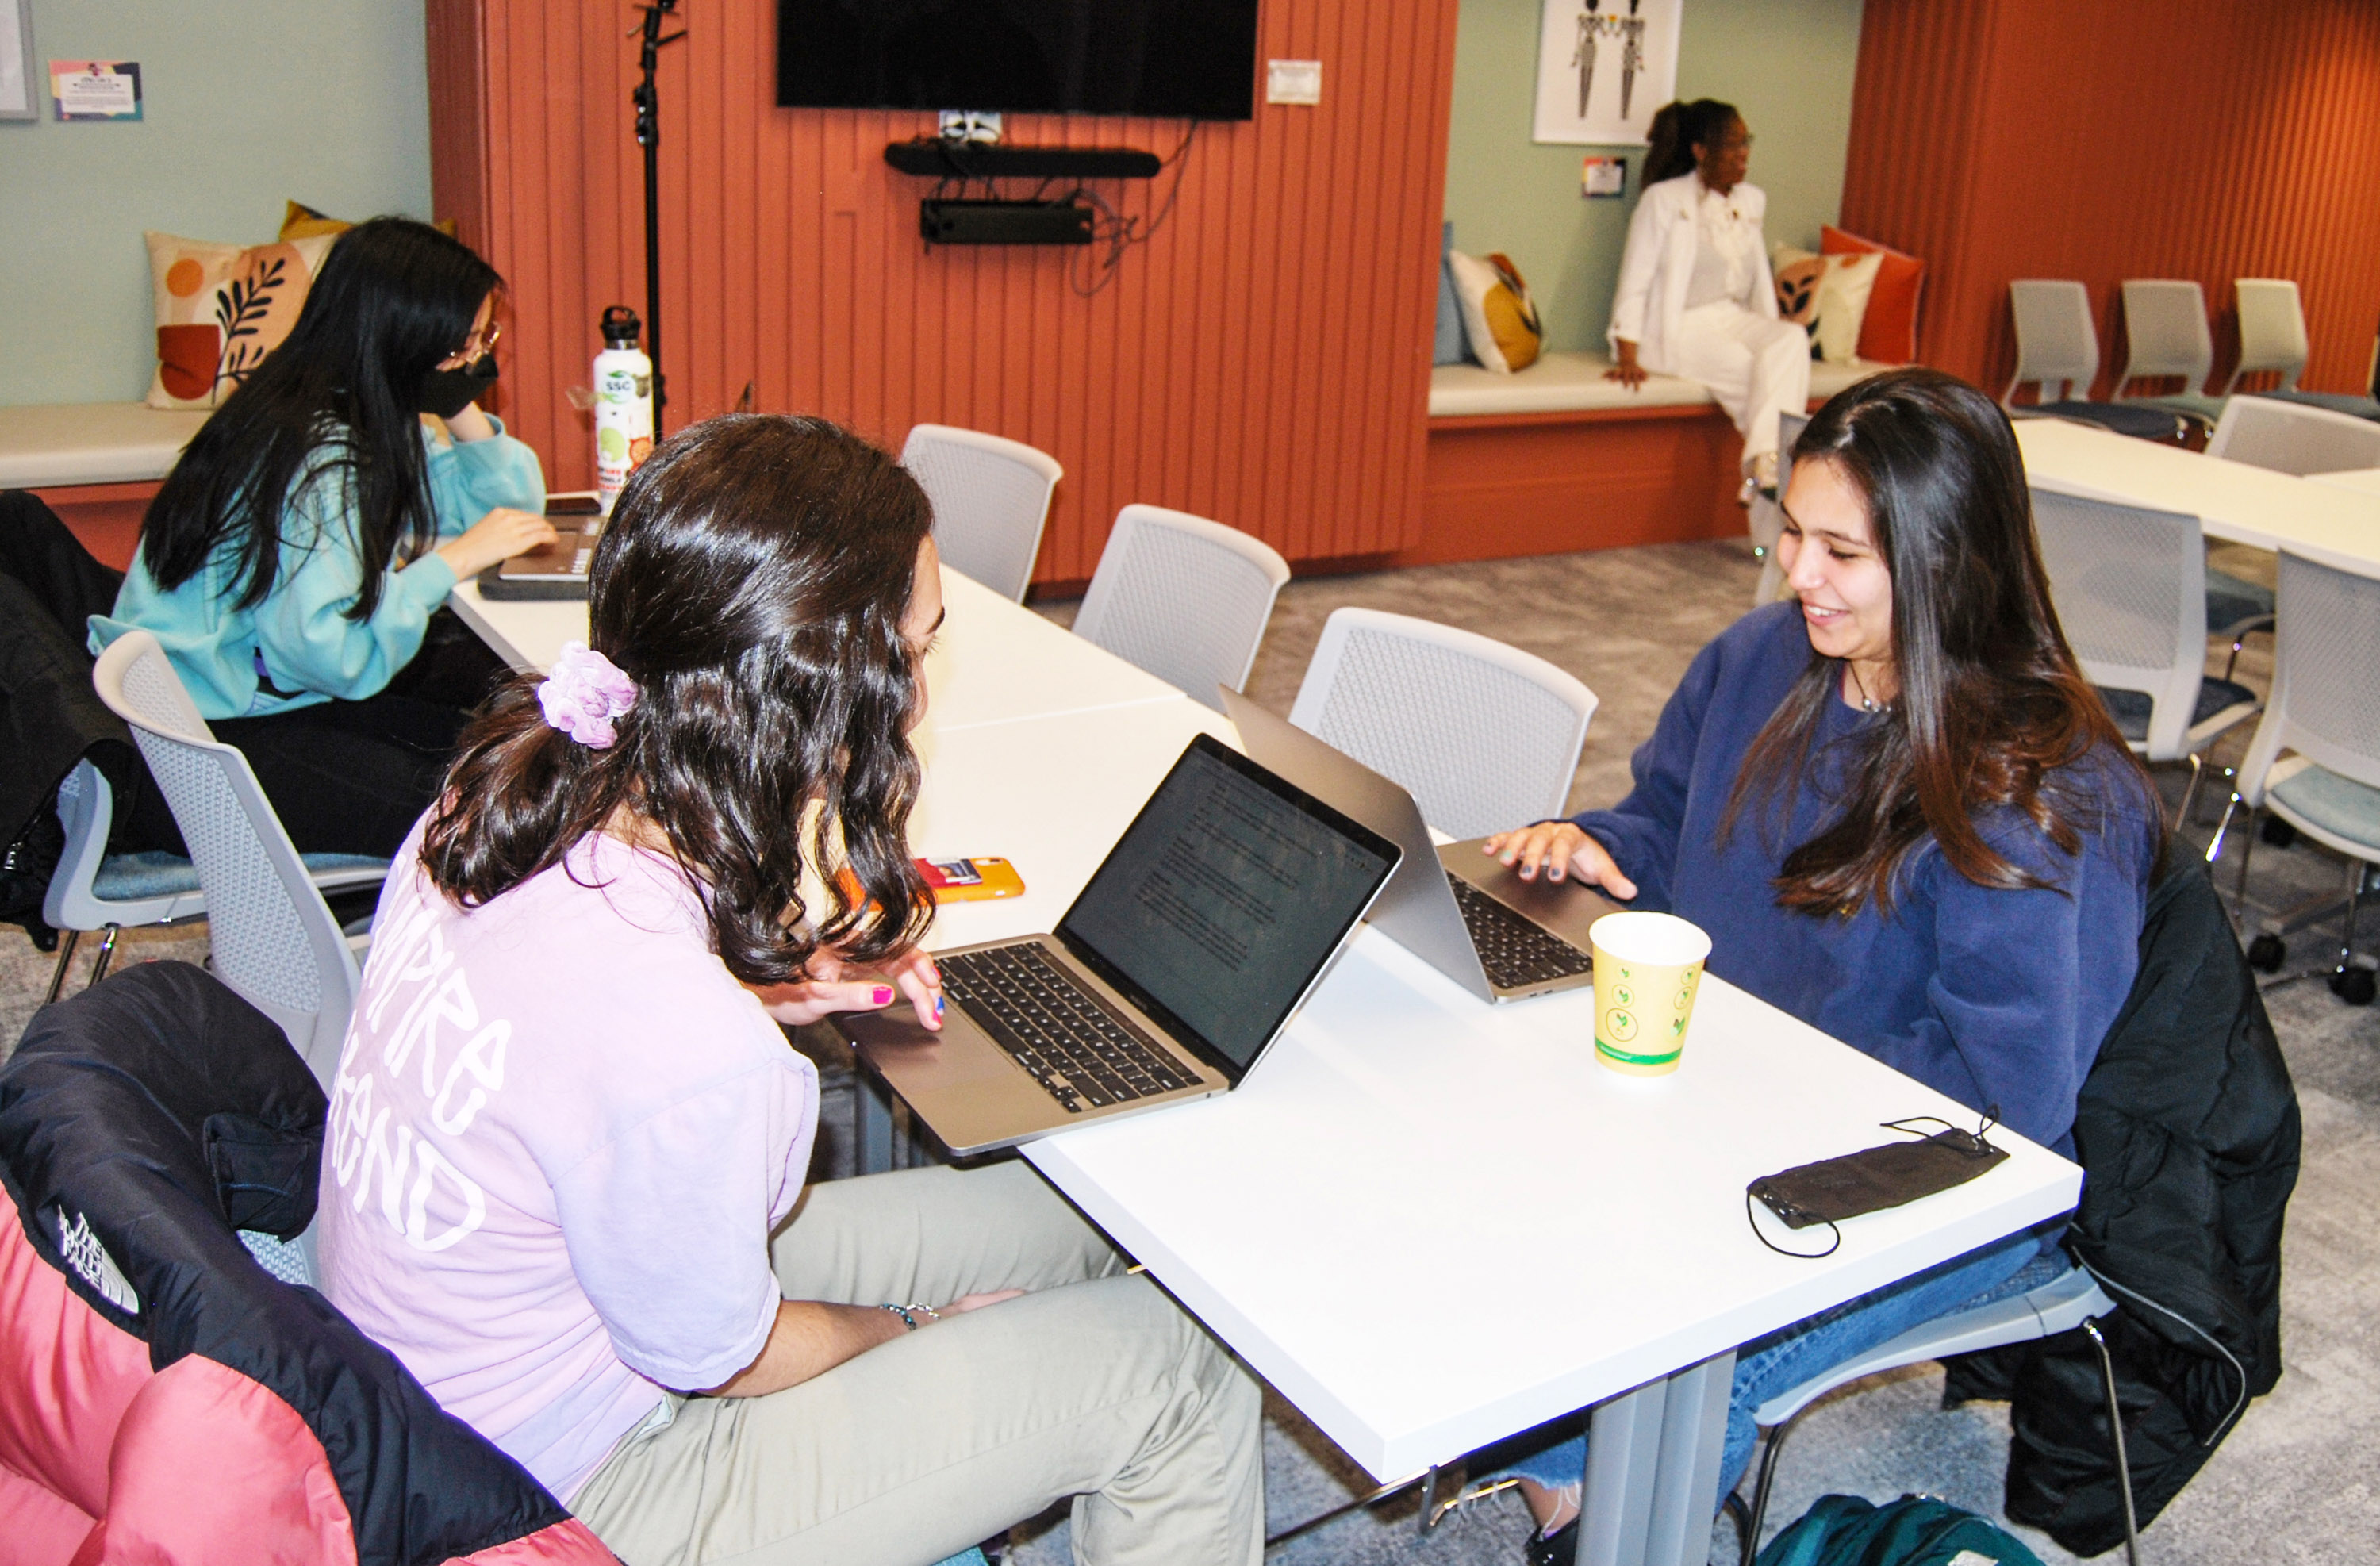 students at a table in the Cheney Room using laptops